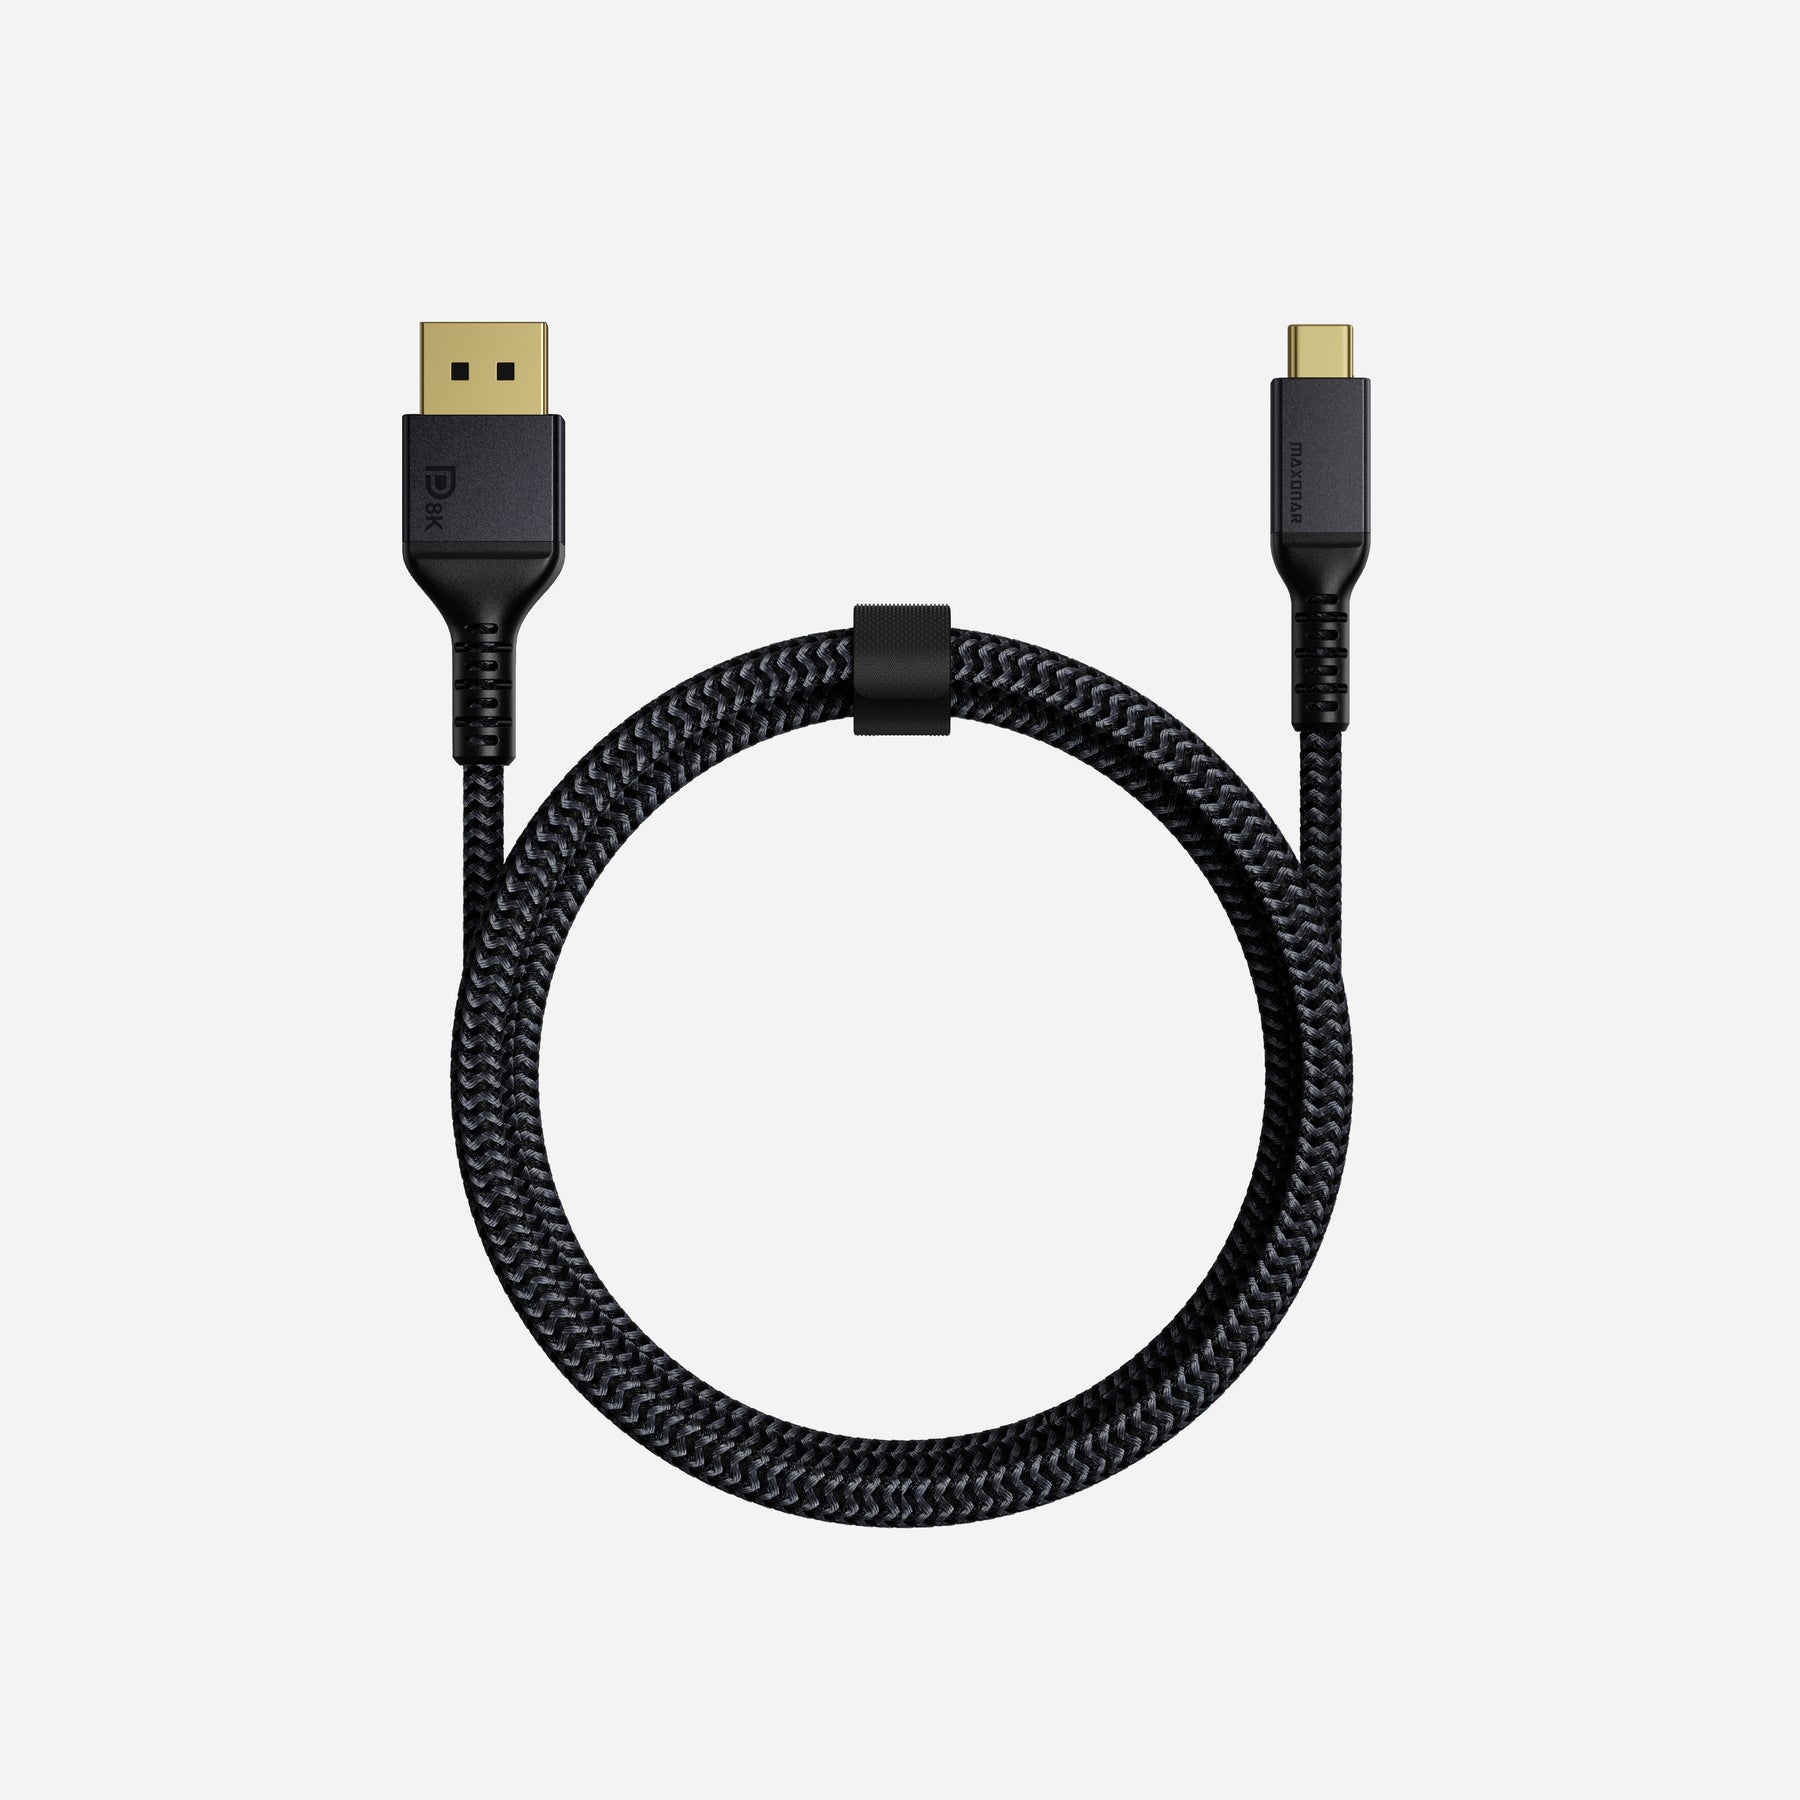 4K Displayport to HDMI-compatible Cable 6 feet, Display Port DP to  HDMI-compatible Adapter High Speed (1440P 60Hz, 1080P 120Hz) Support Video  & Audio